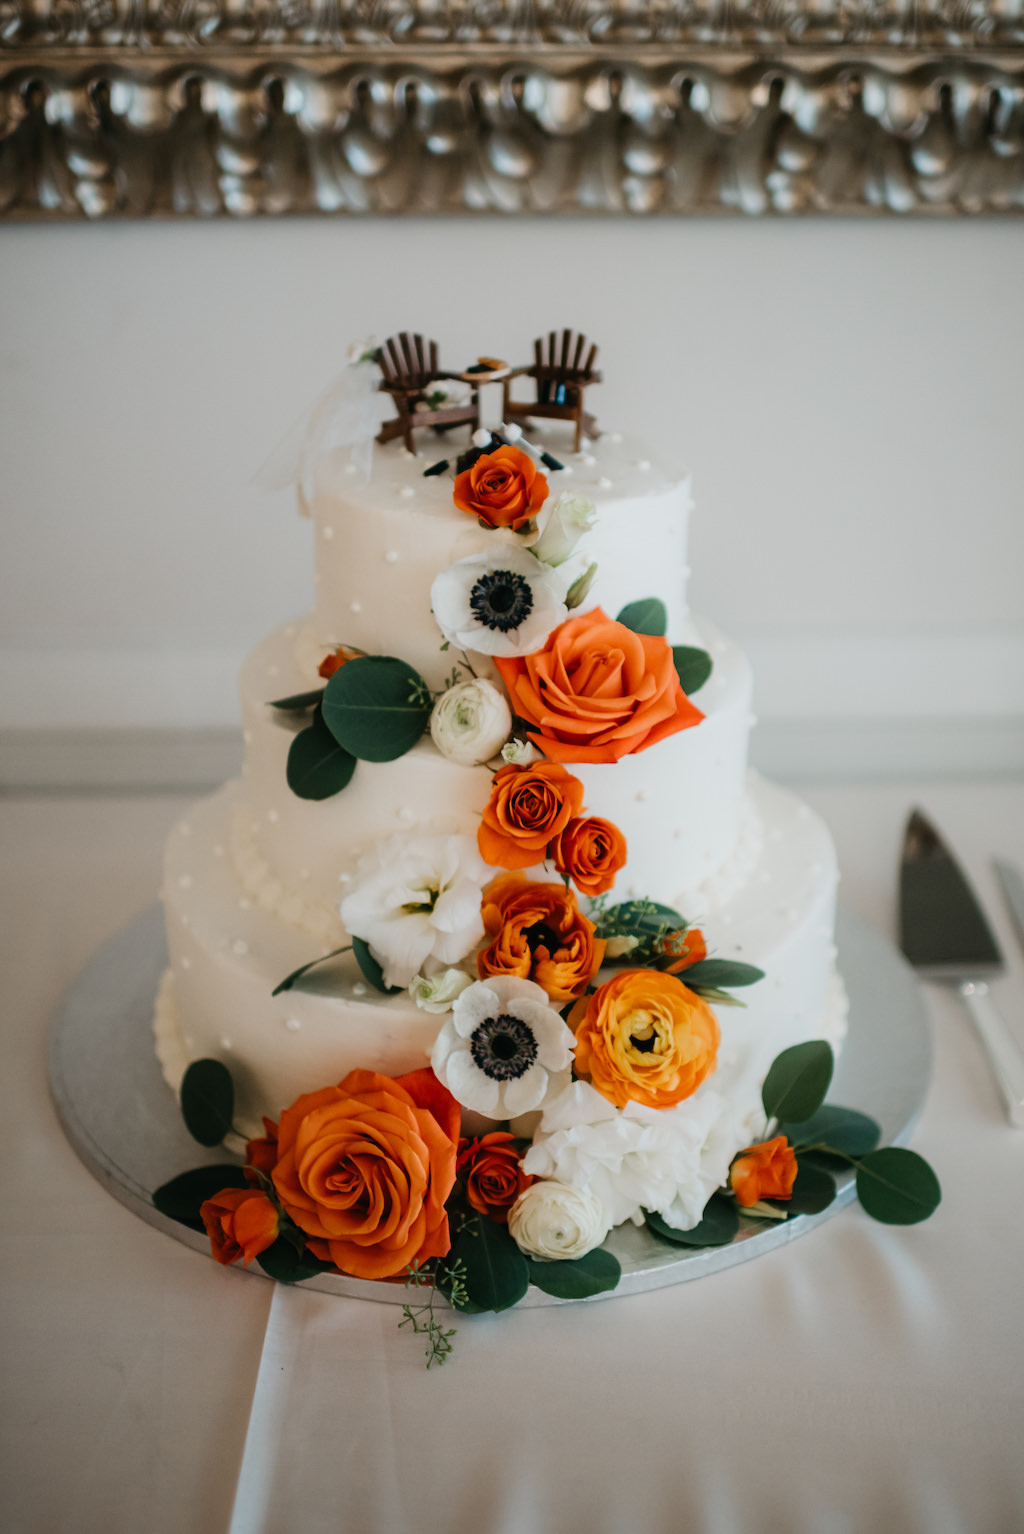 Three Tier White Wedding Cake with Orange, White Anemone and Greenery Cascading Real Florals with Adirondack Beach Chair Cake Toppers